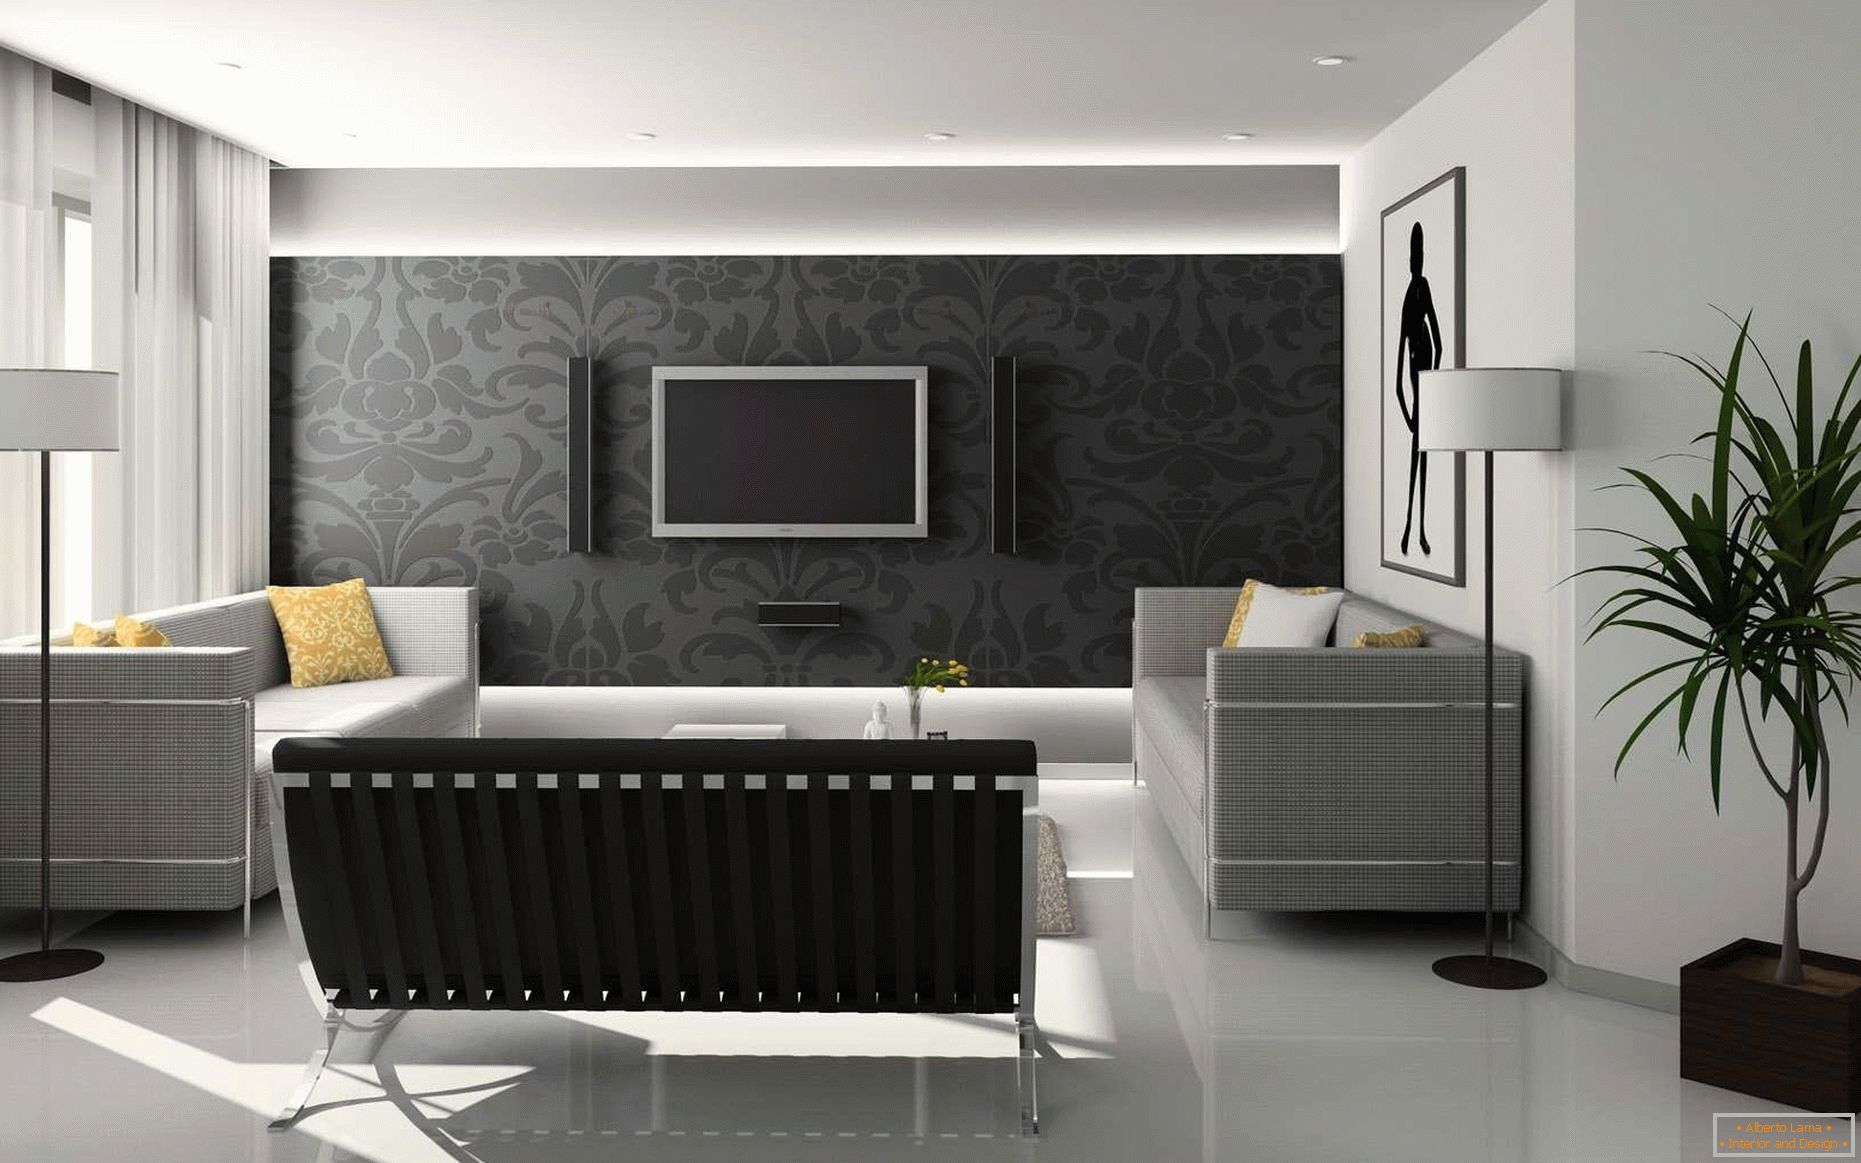 The combination of black and white colors in the interior